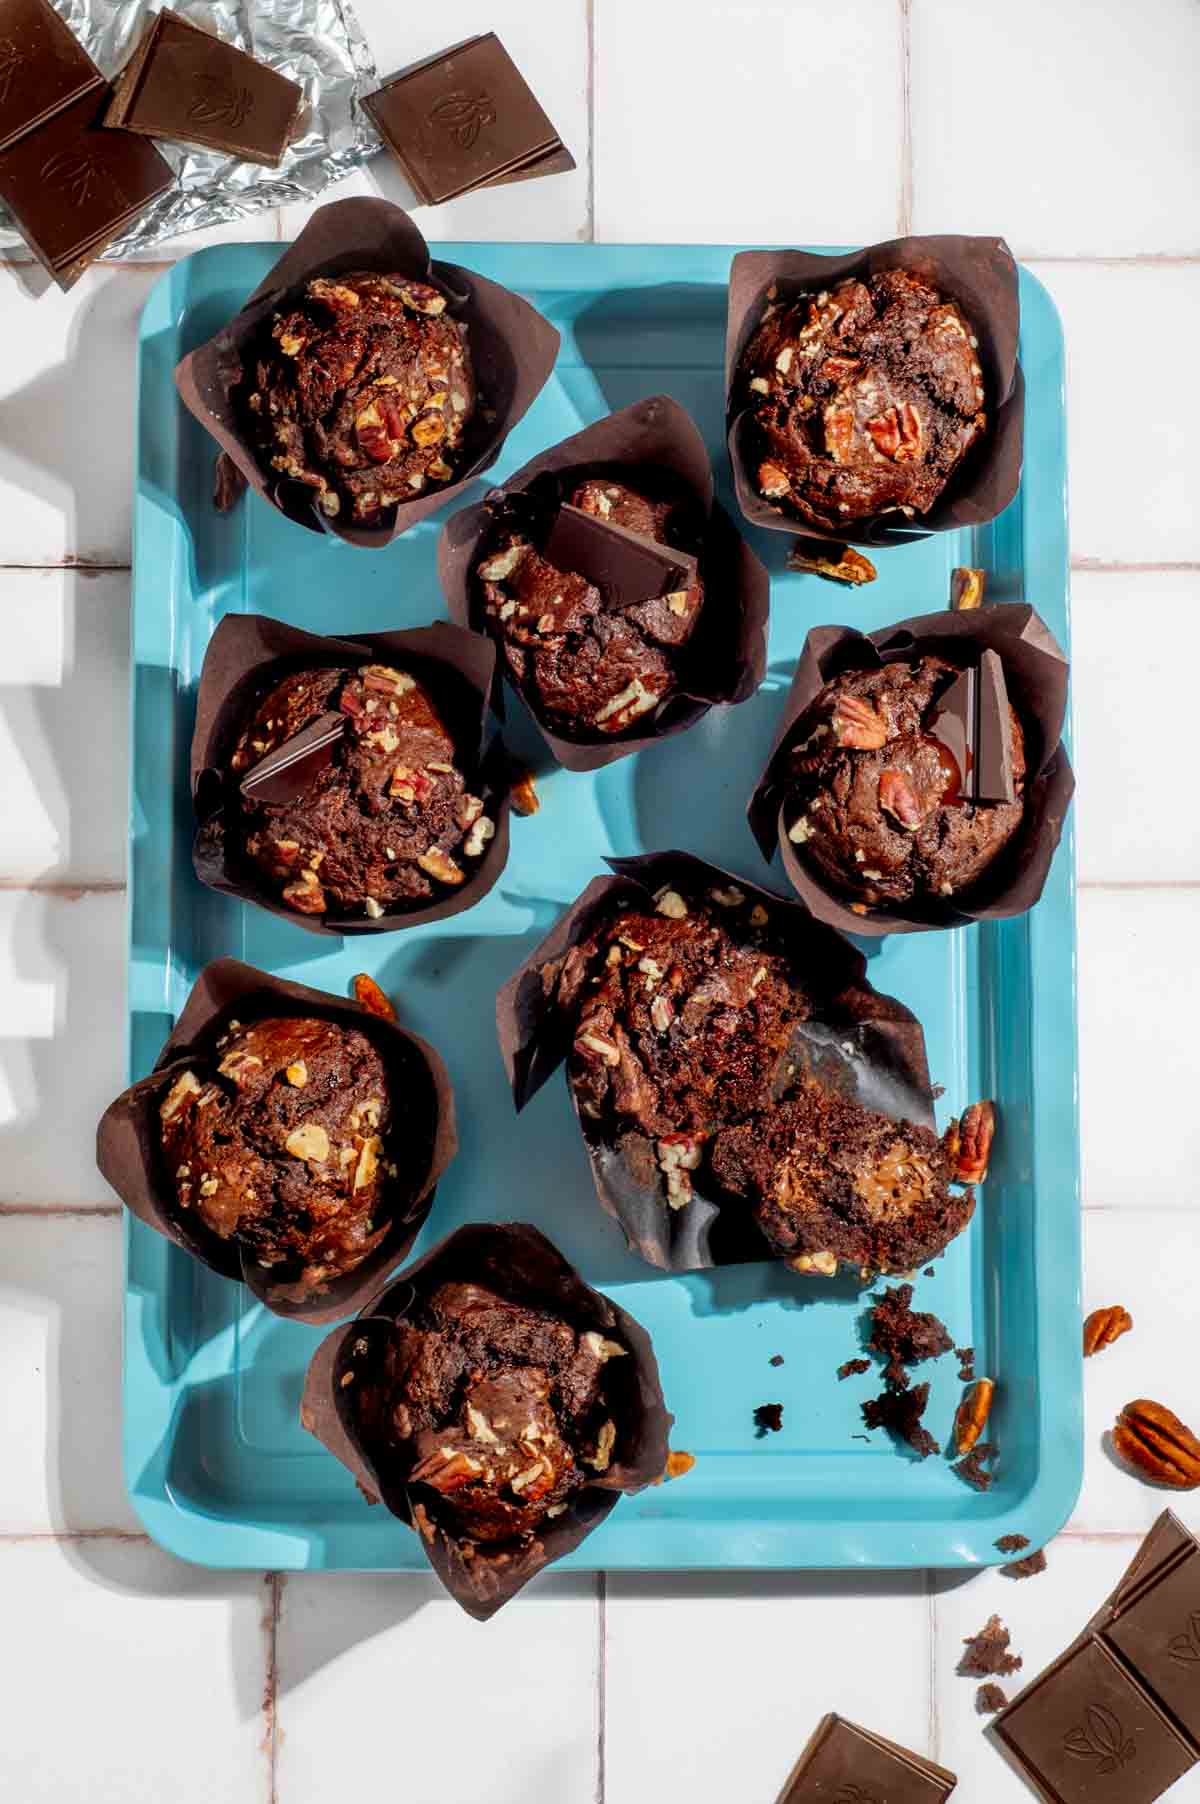 Banana chocolate chunk muffins on a turquoise baking tray.